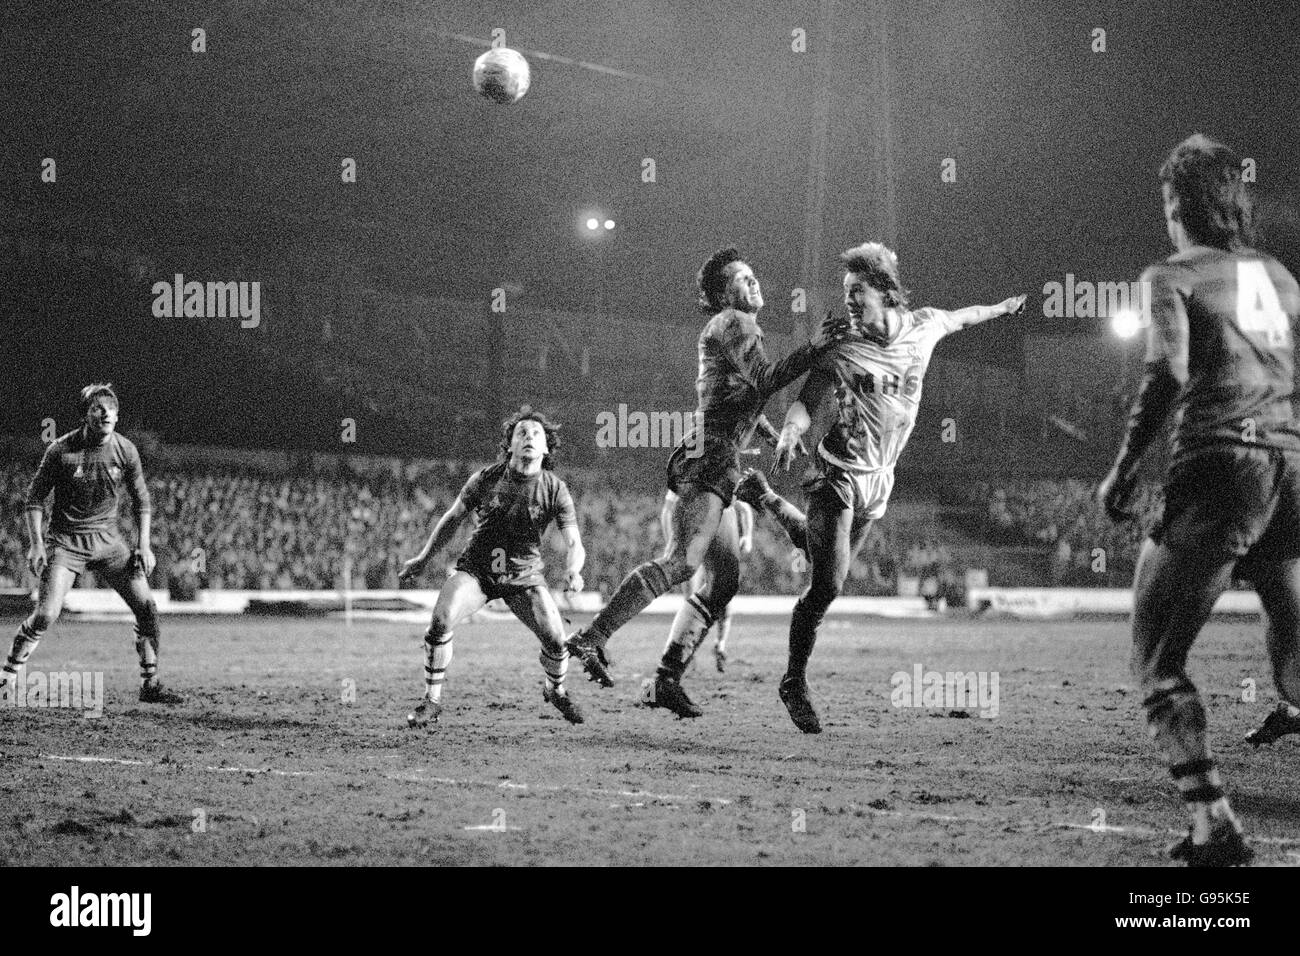 Sheffield Wednesday's Lee Chapman (r) beats Chelsea's Joey McLaughlin (c) to head the ball goalwards, watched by Chelsea's Mickey Thomas (second l) Stock Photo